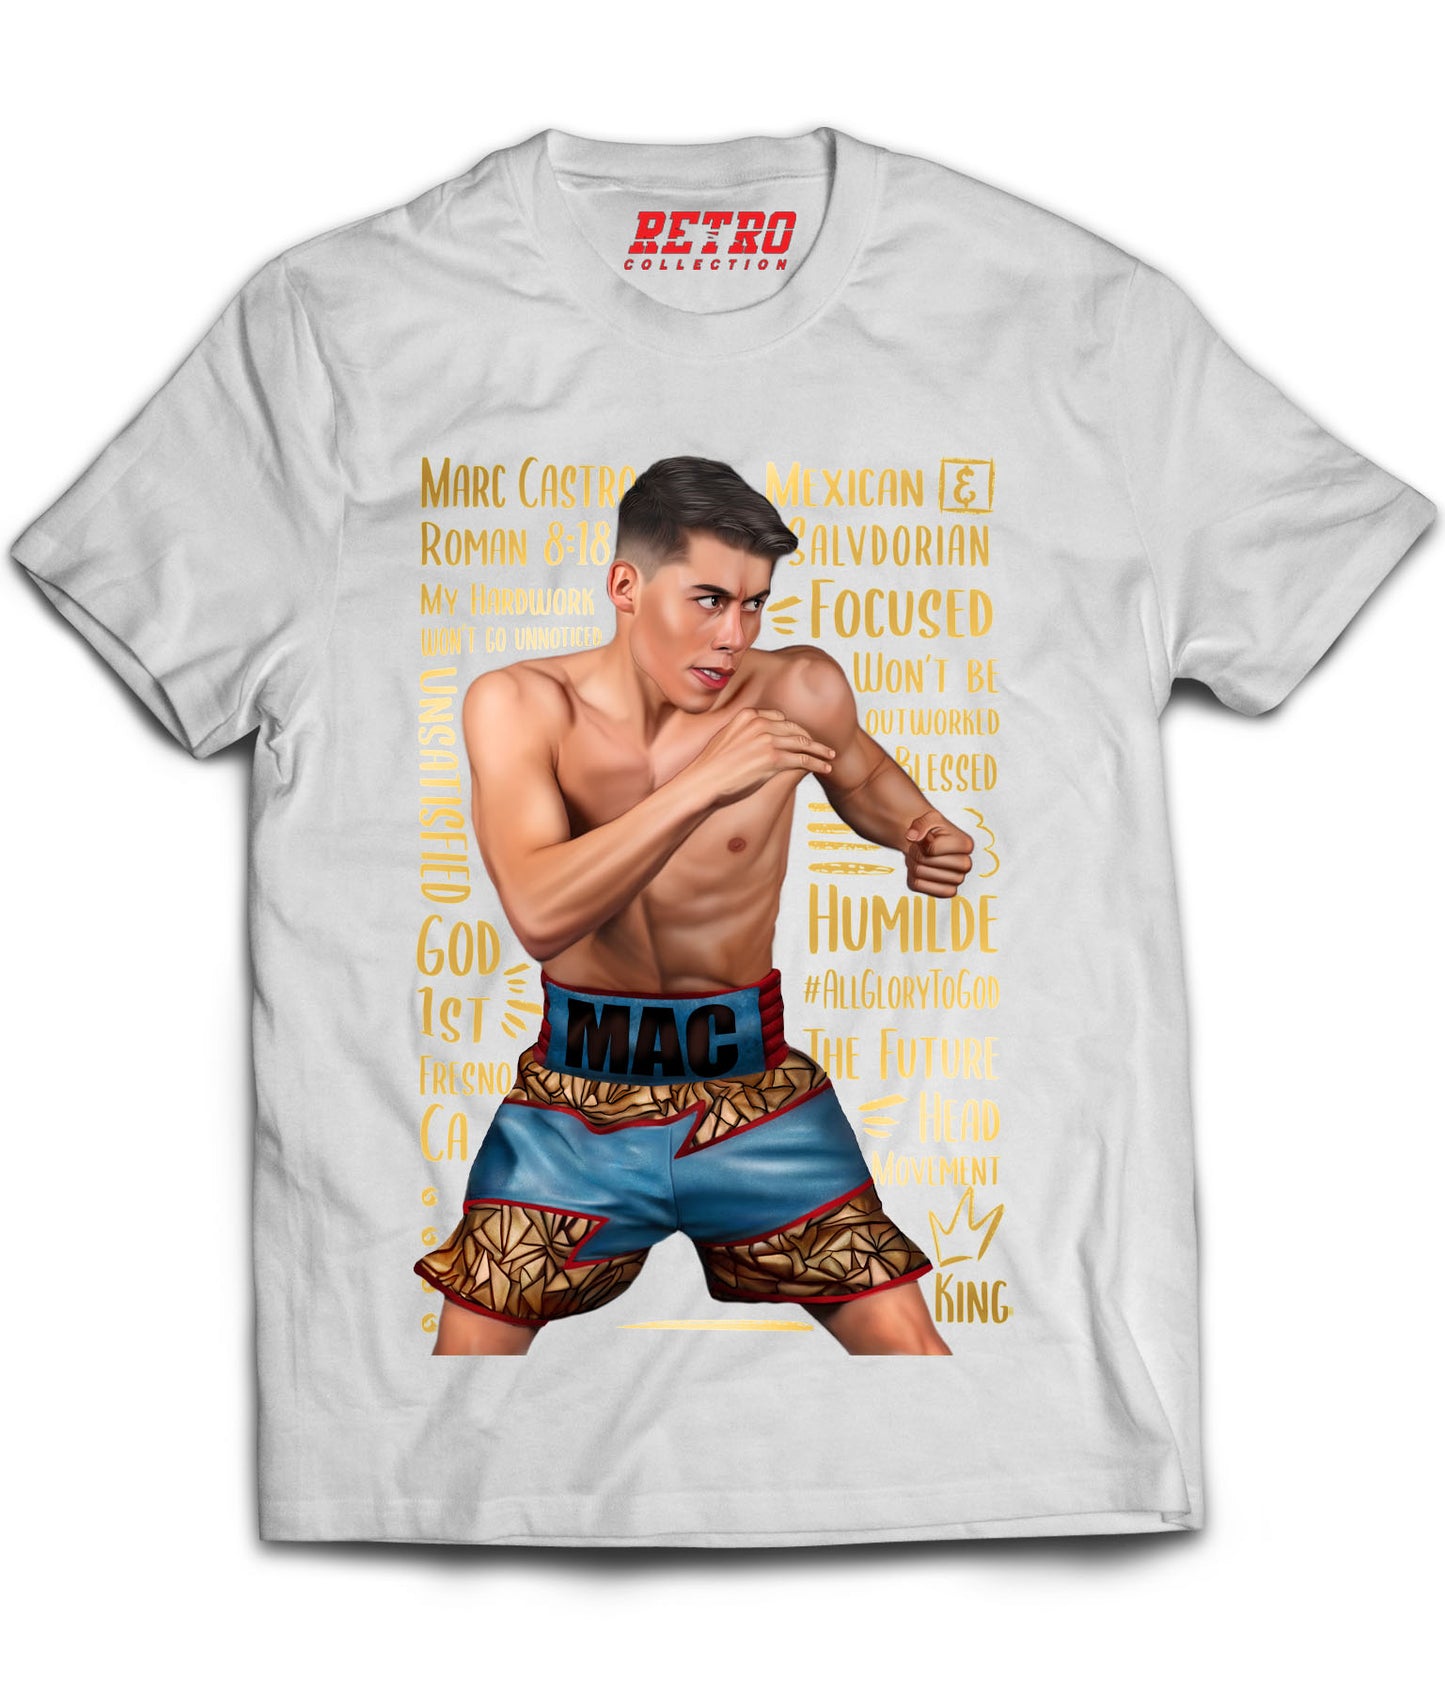 Marc Castro "Gold" Tribute Shirt *LIMITED EDITION* (Black, Gray, Red, White)